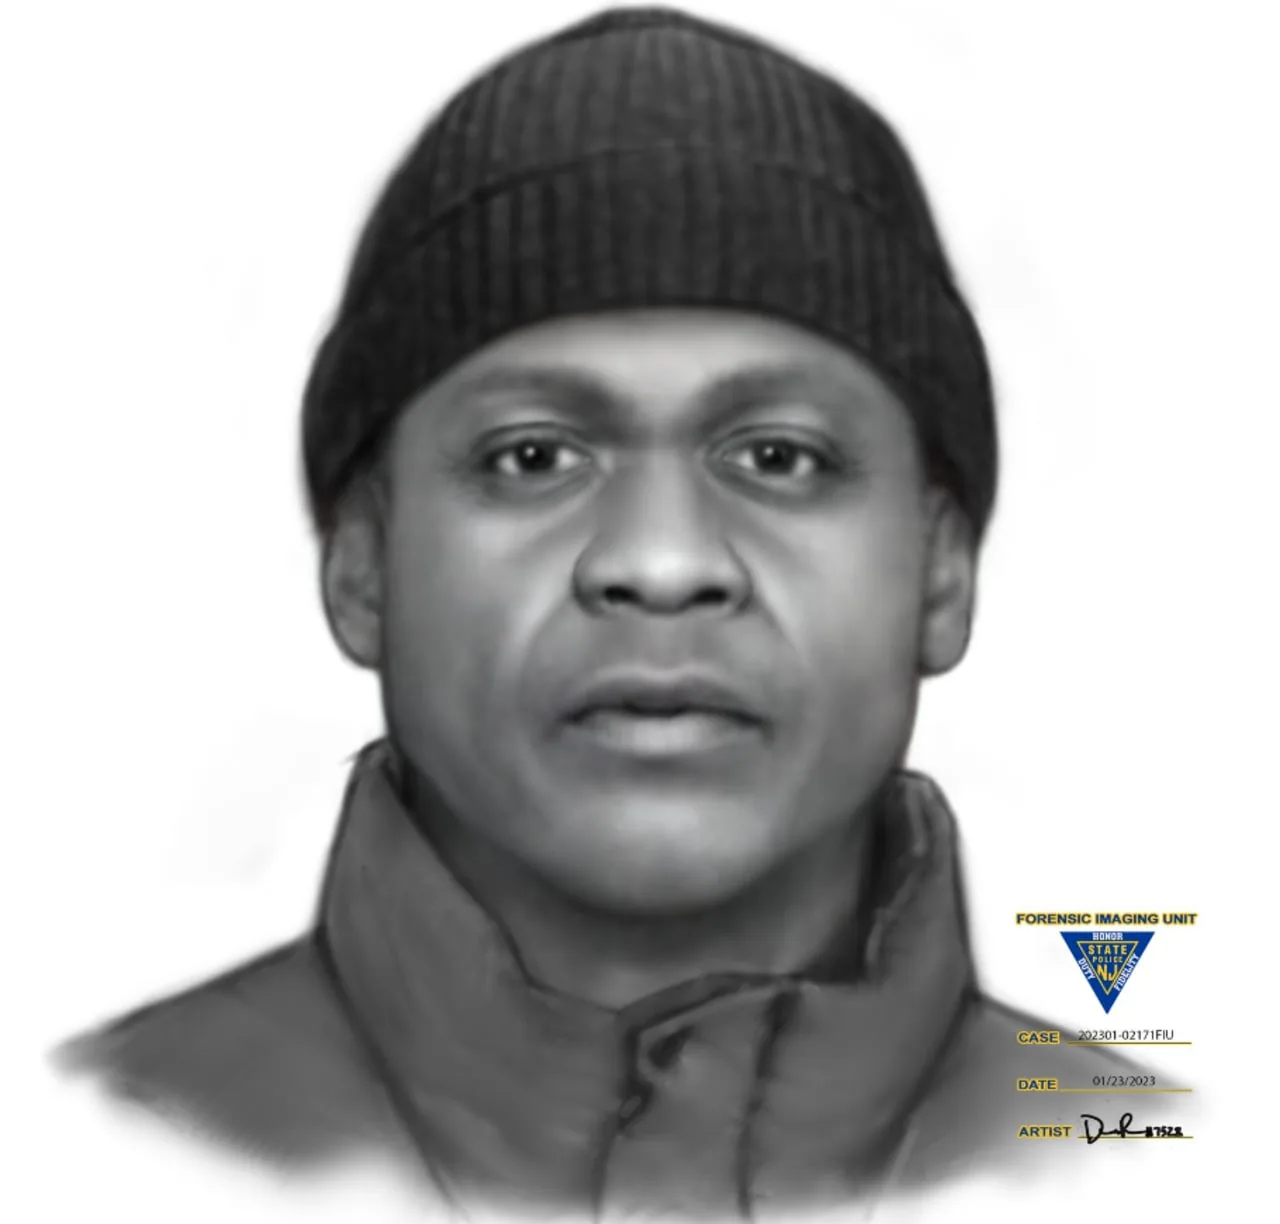 Police release sketch of man who stole cash and jewelry from Mercer Street home in Princeton